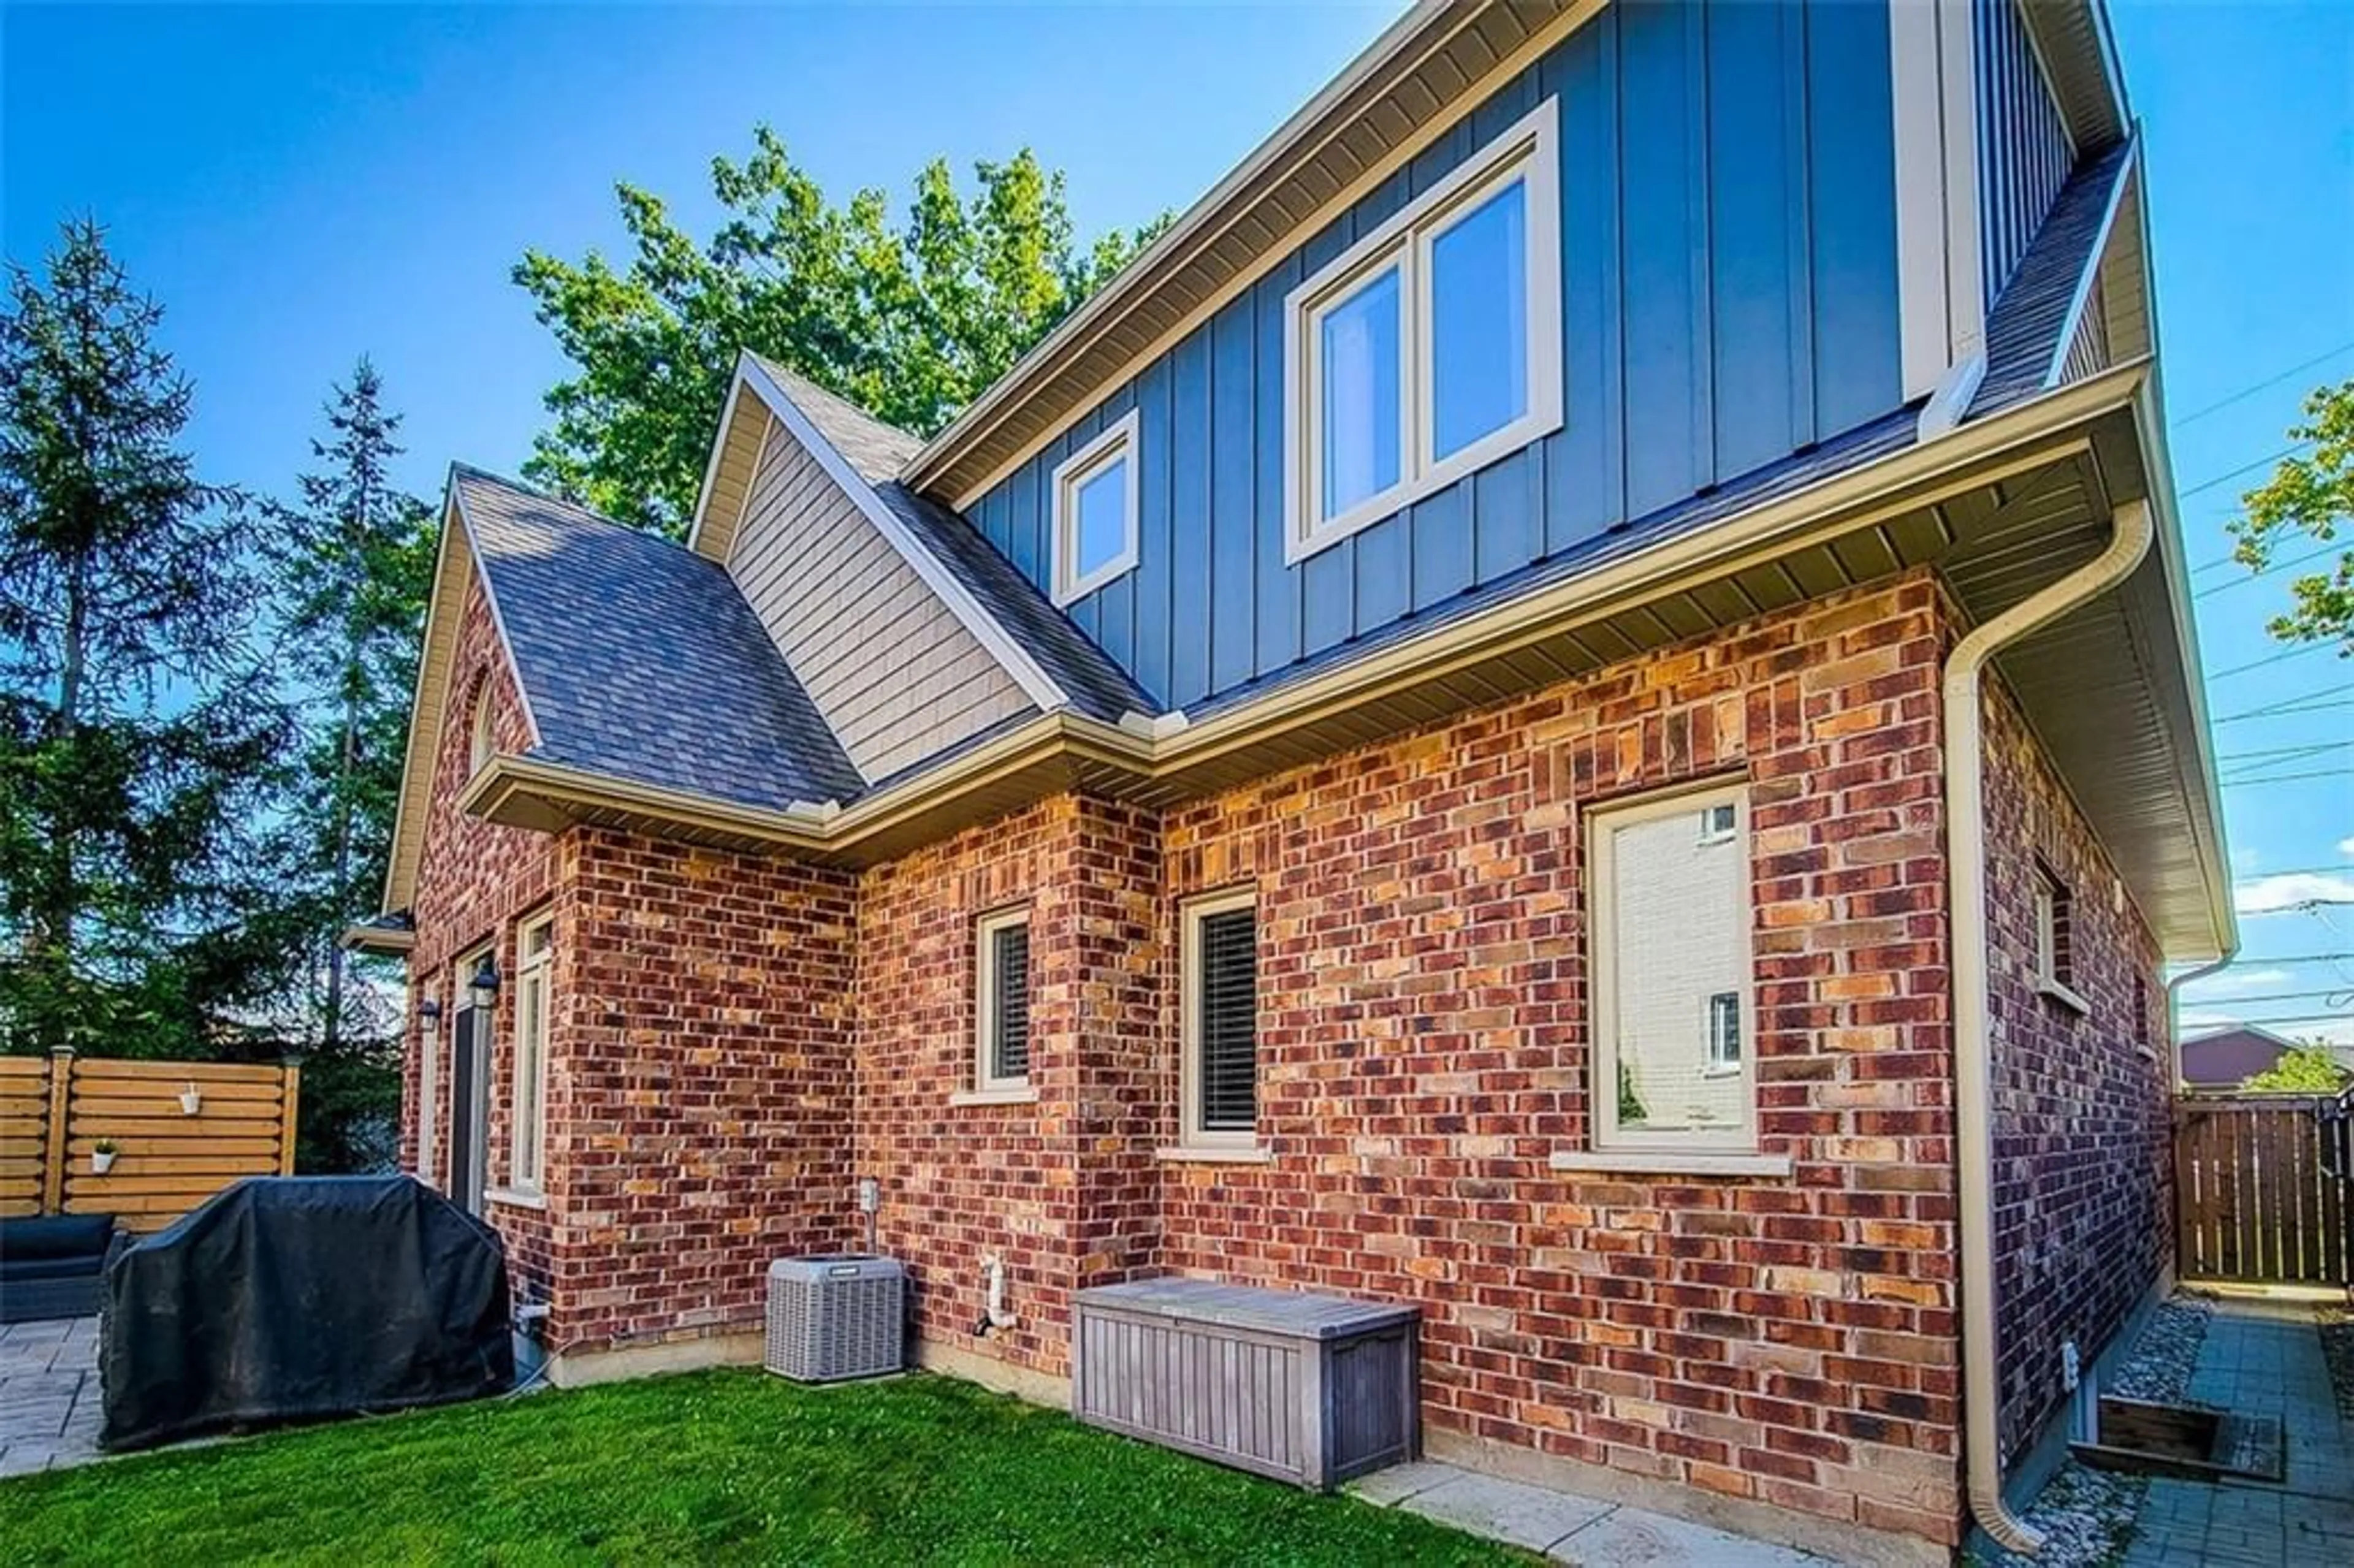 Home with brick exterior material for 188 Rykert St, St. Catharines Ontario L2S 2B7